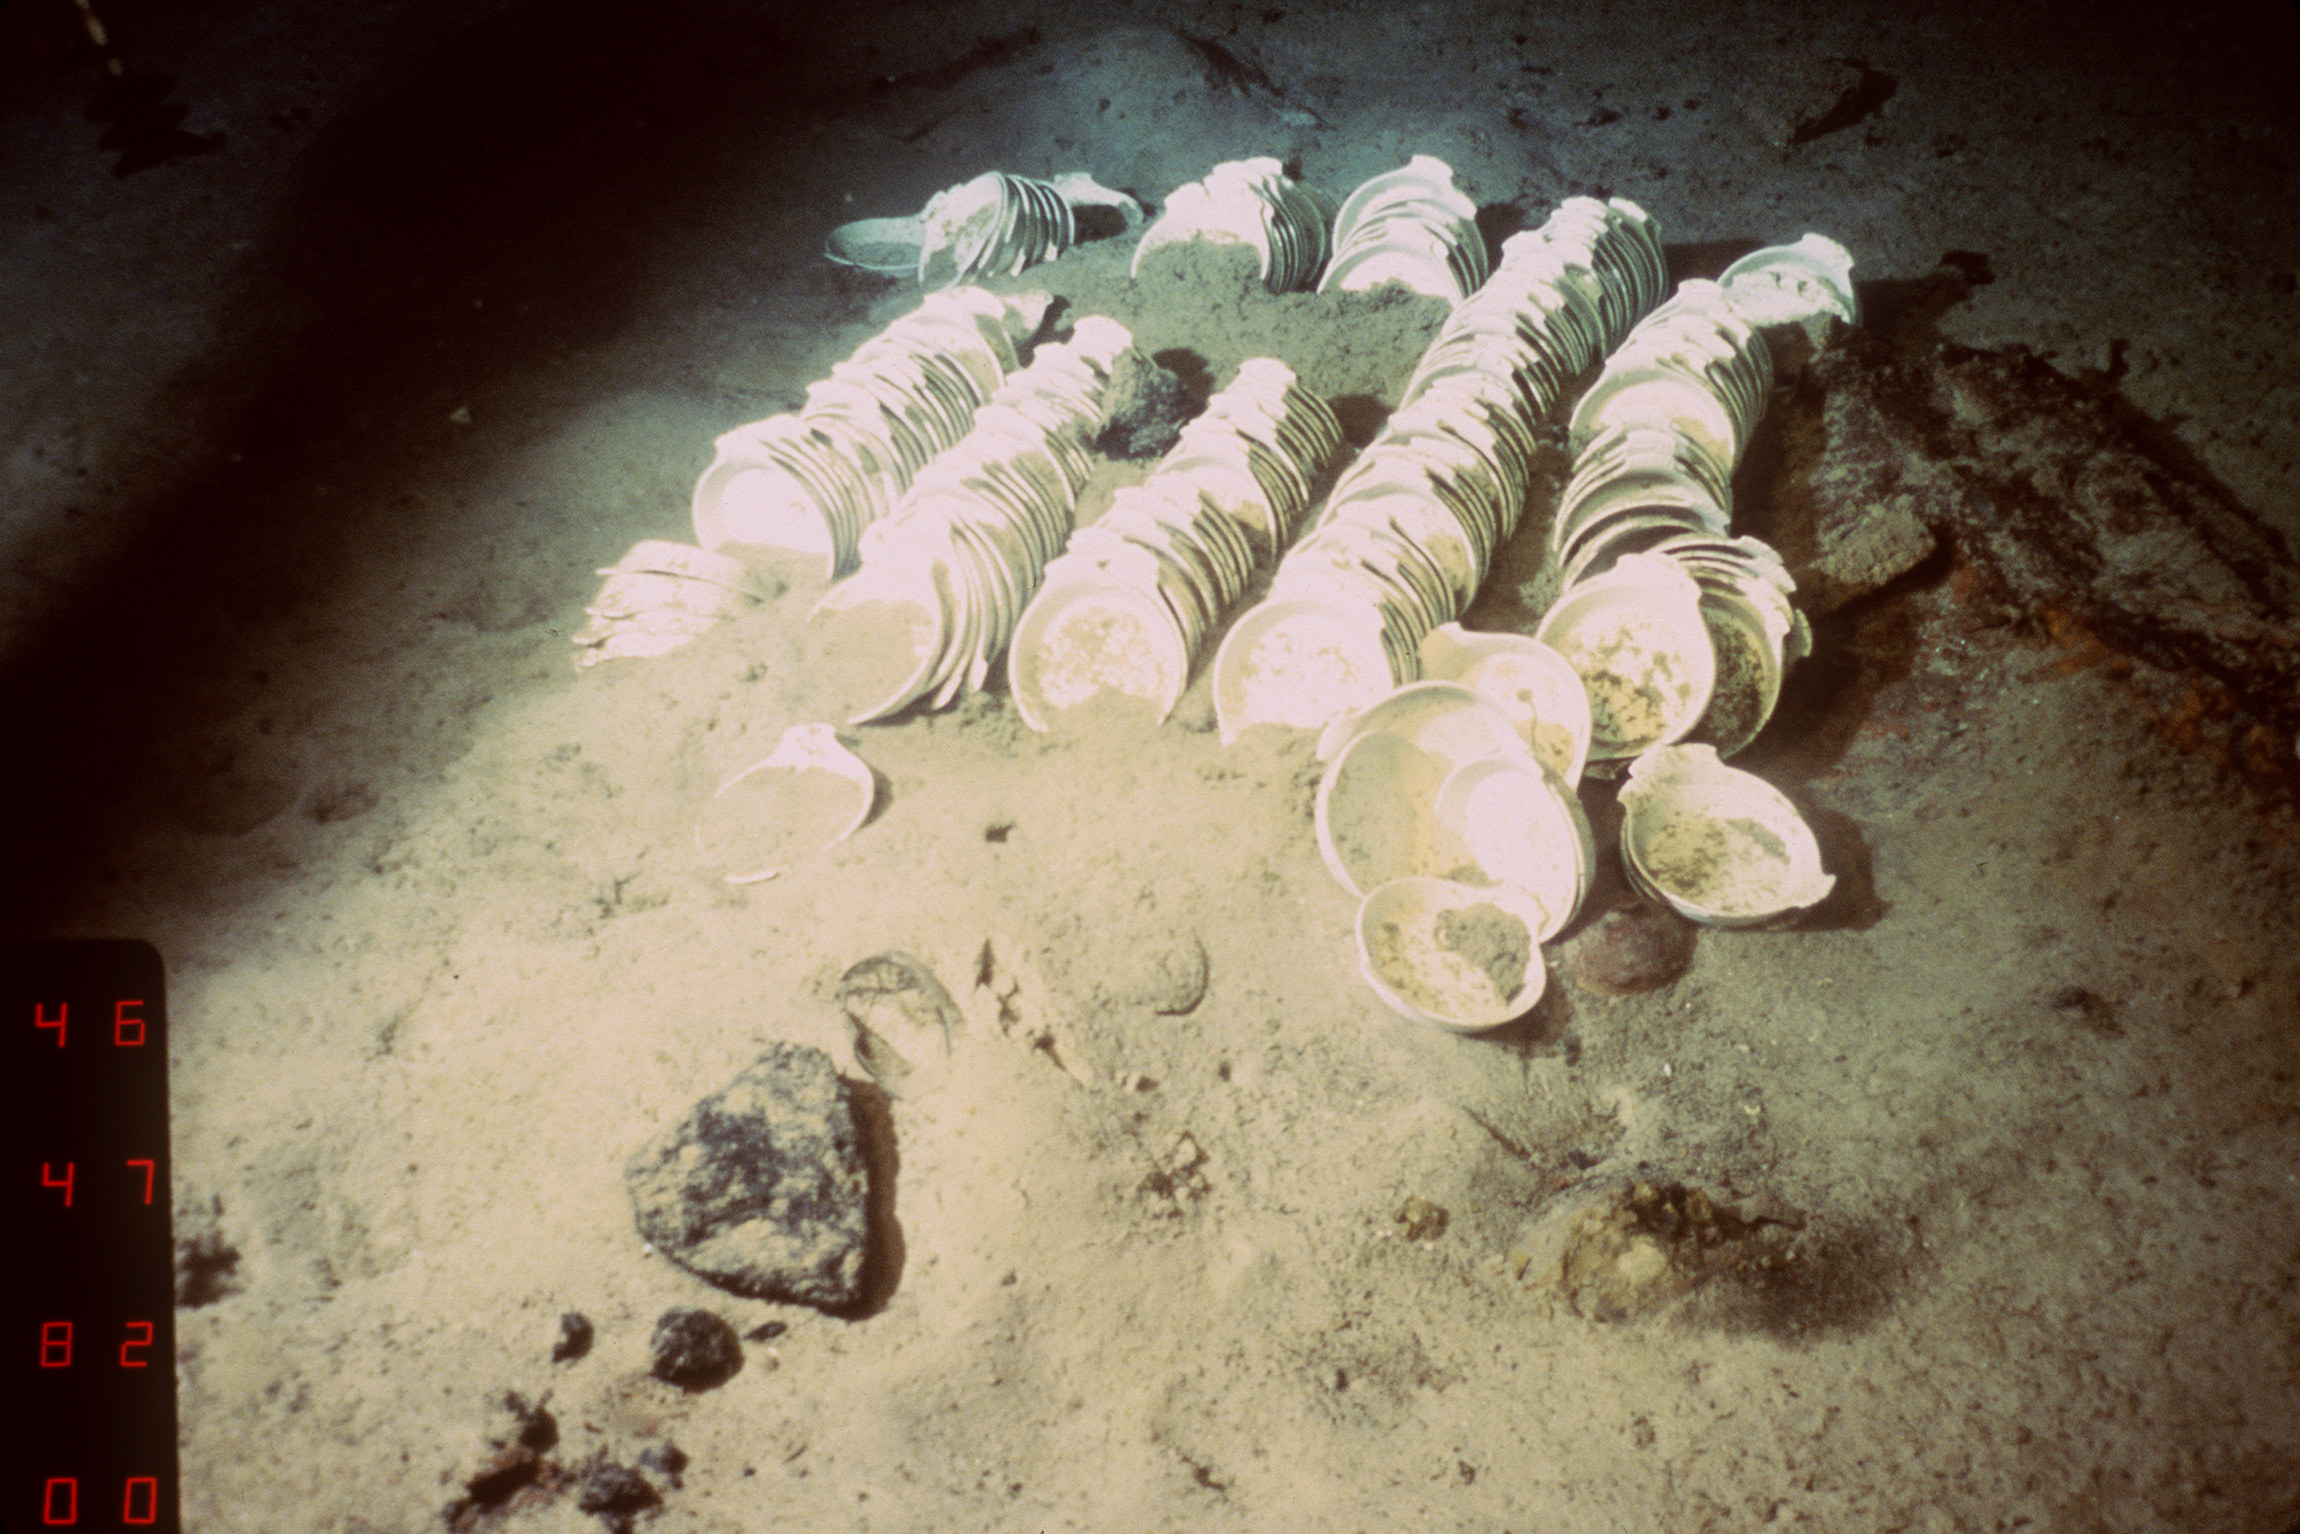 A dimly lit shot of stacks of dishes on the ocean floor